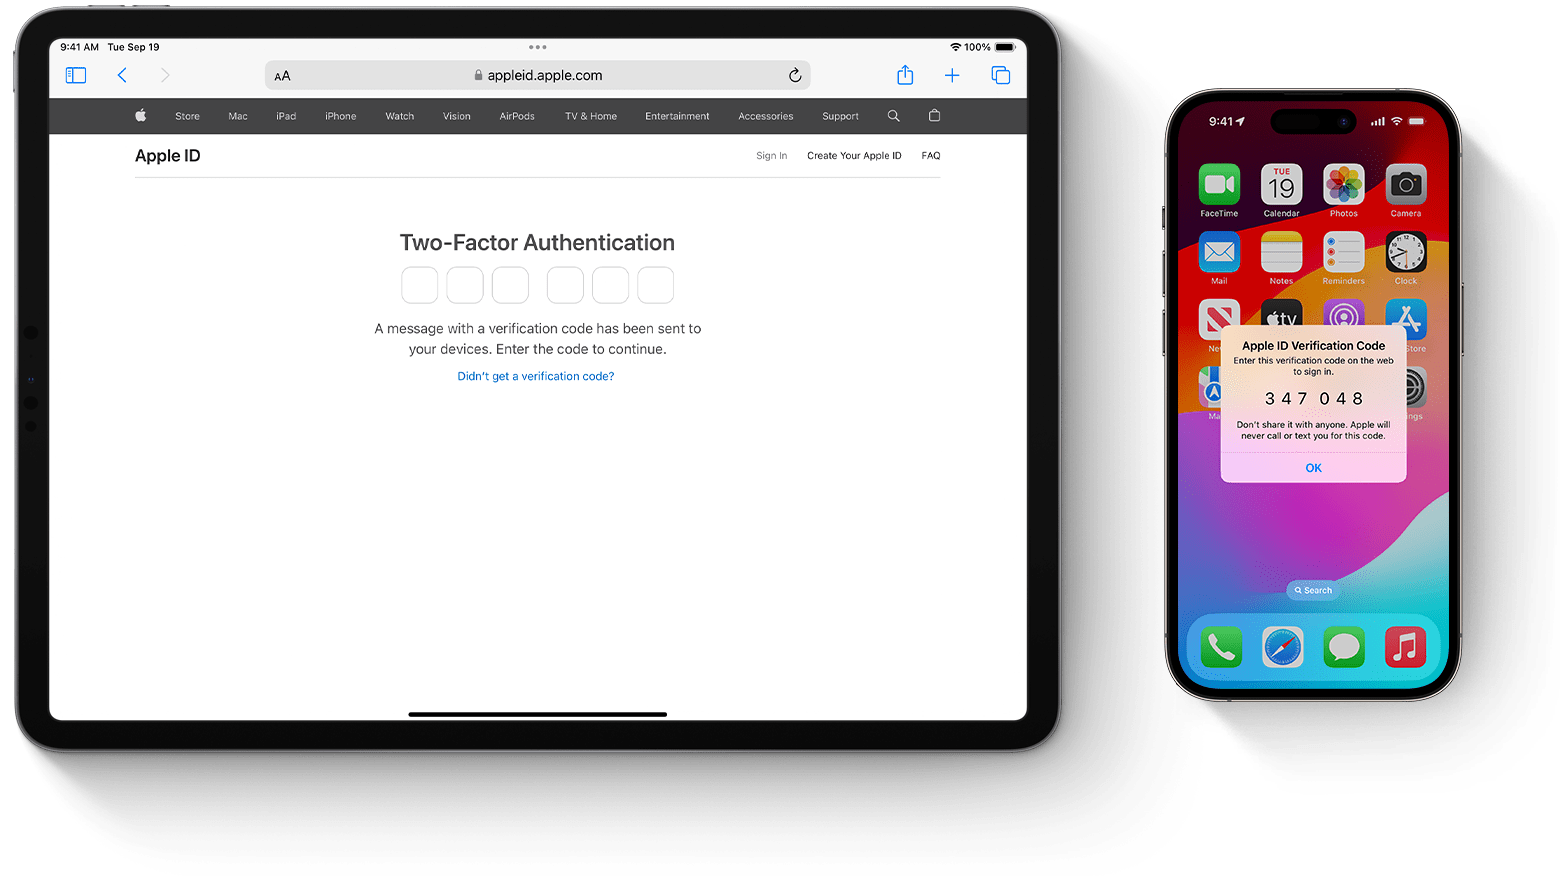 ios-17-iphone-14-pro-ipad-two-factor-authentication-hero.png